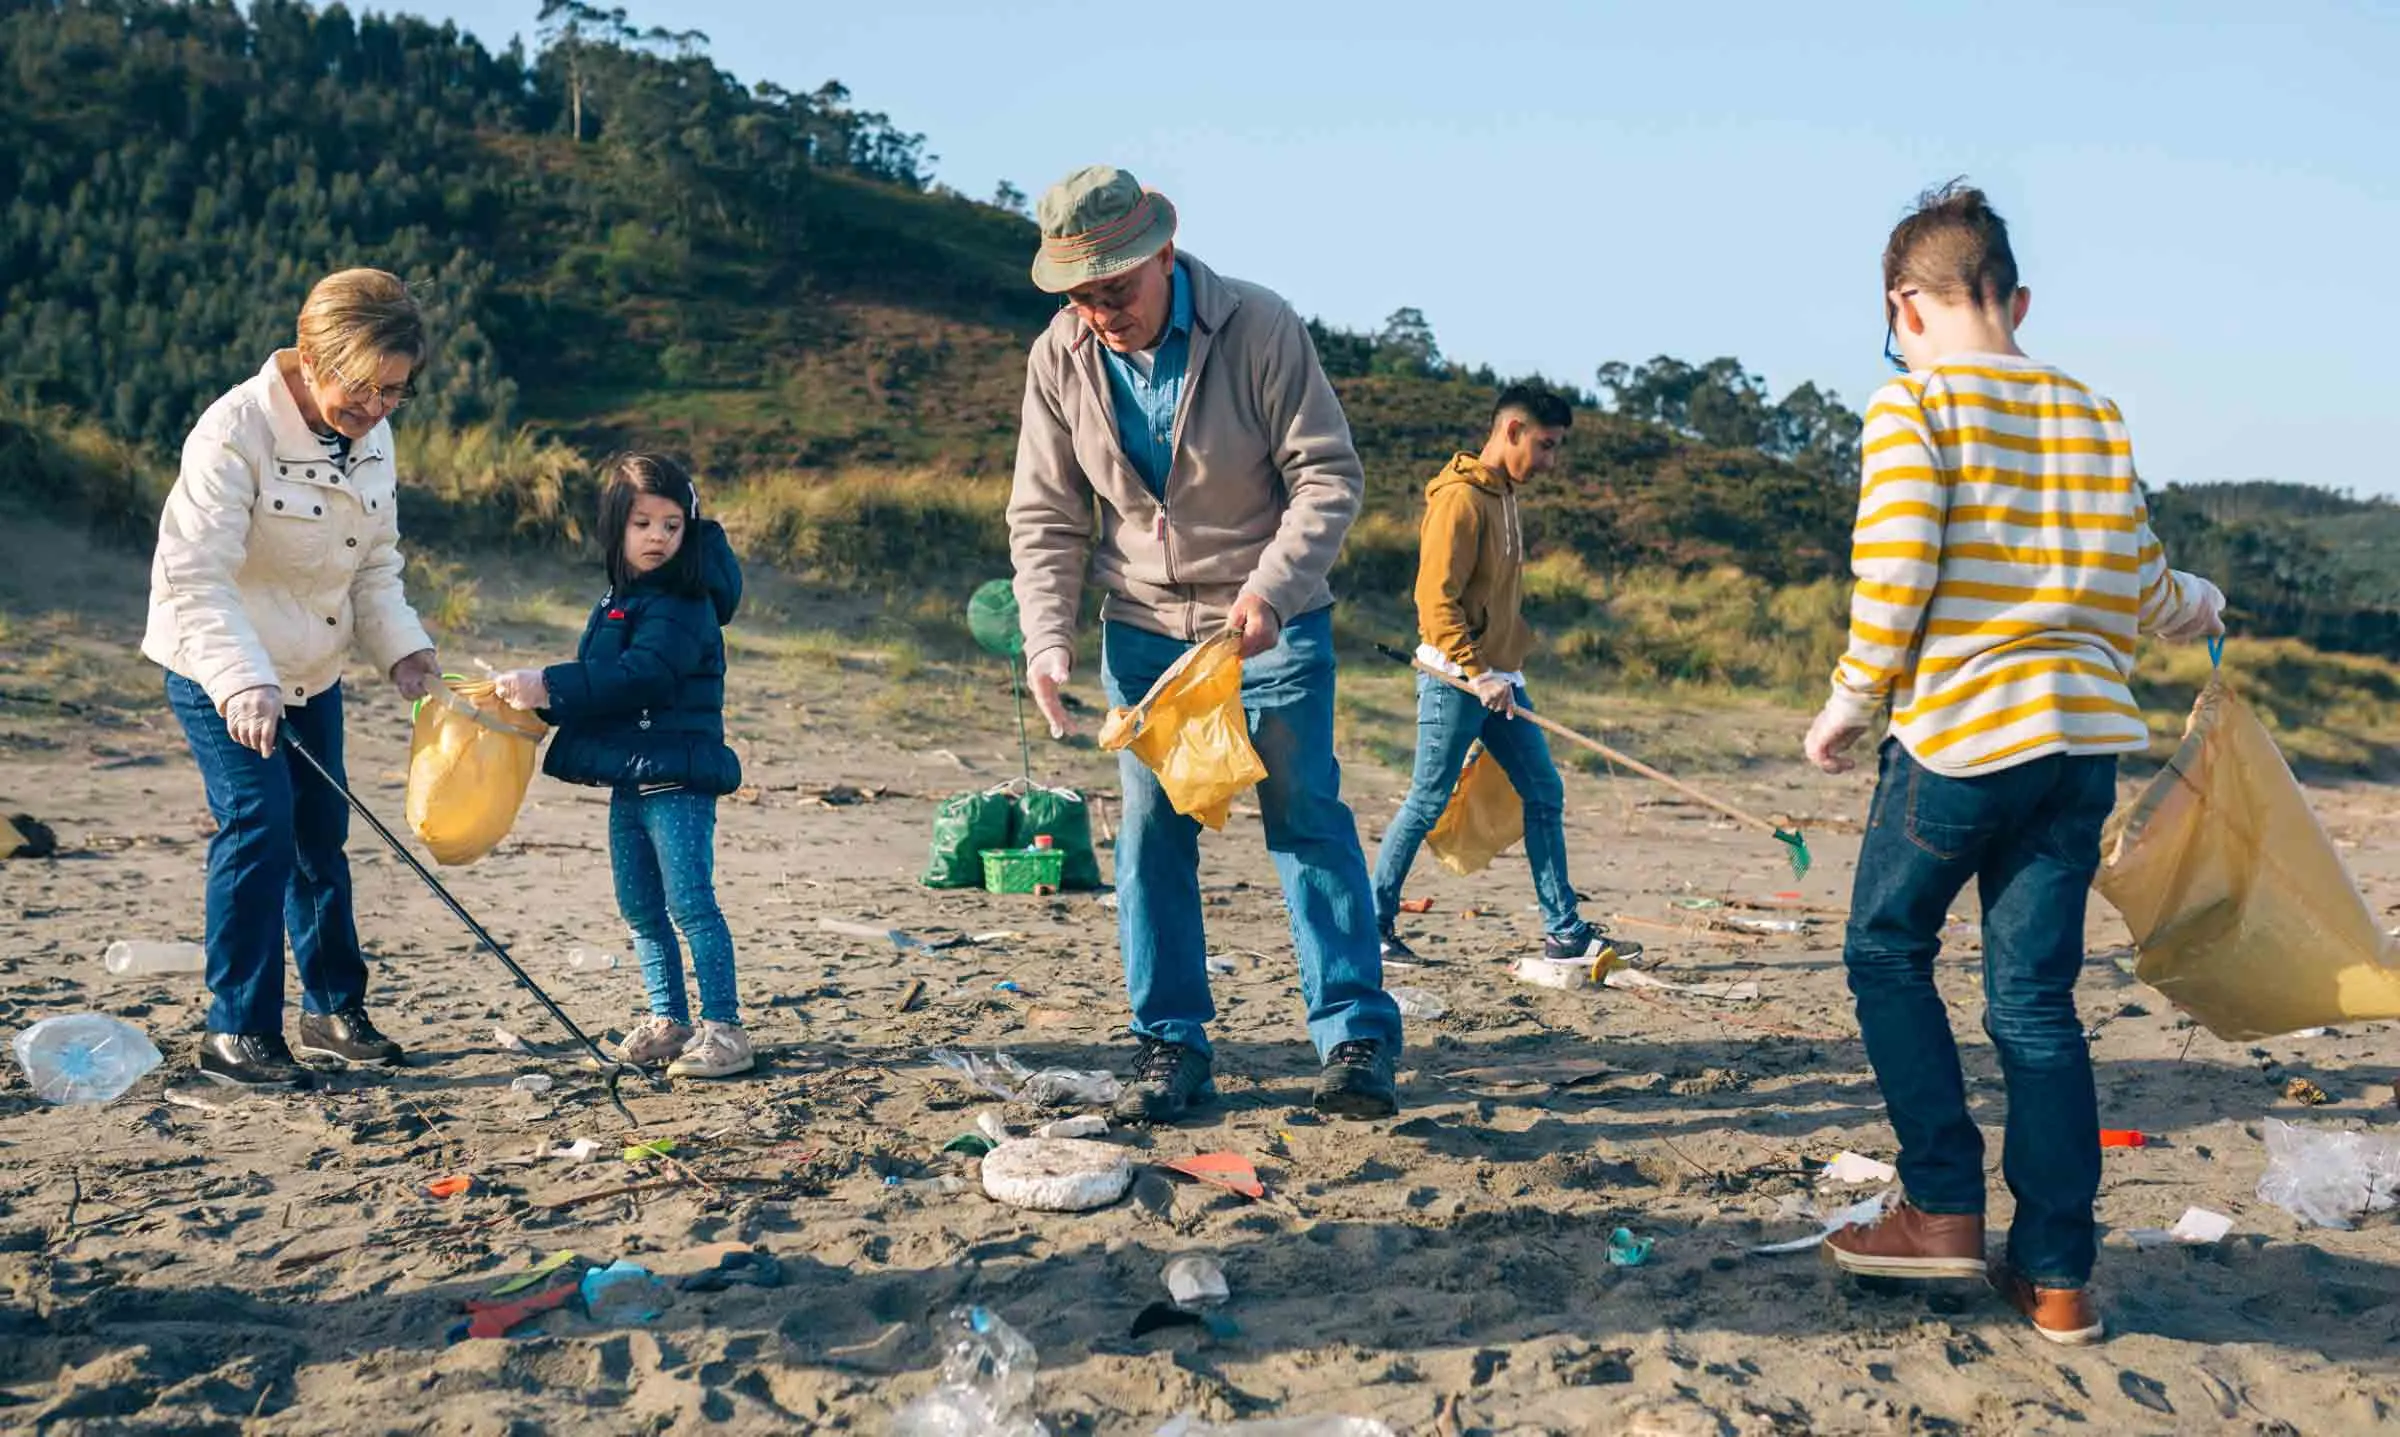 Two older adults and three children on a sandy beach, using litter pickers and bin bags to collect the plastic waste that's washed up onto the beach.